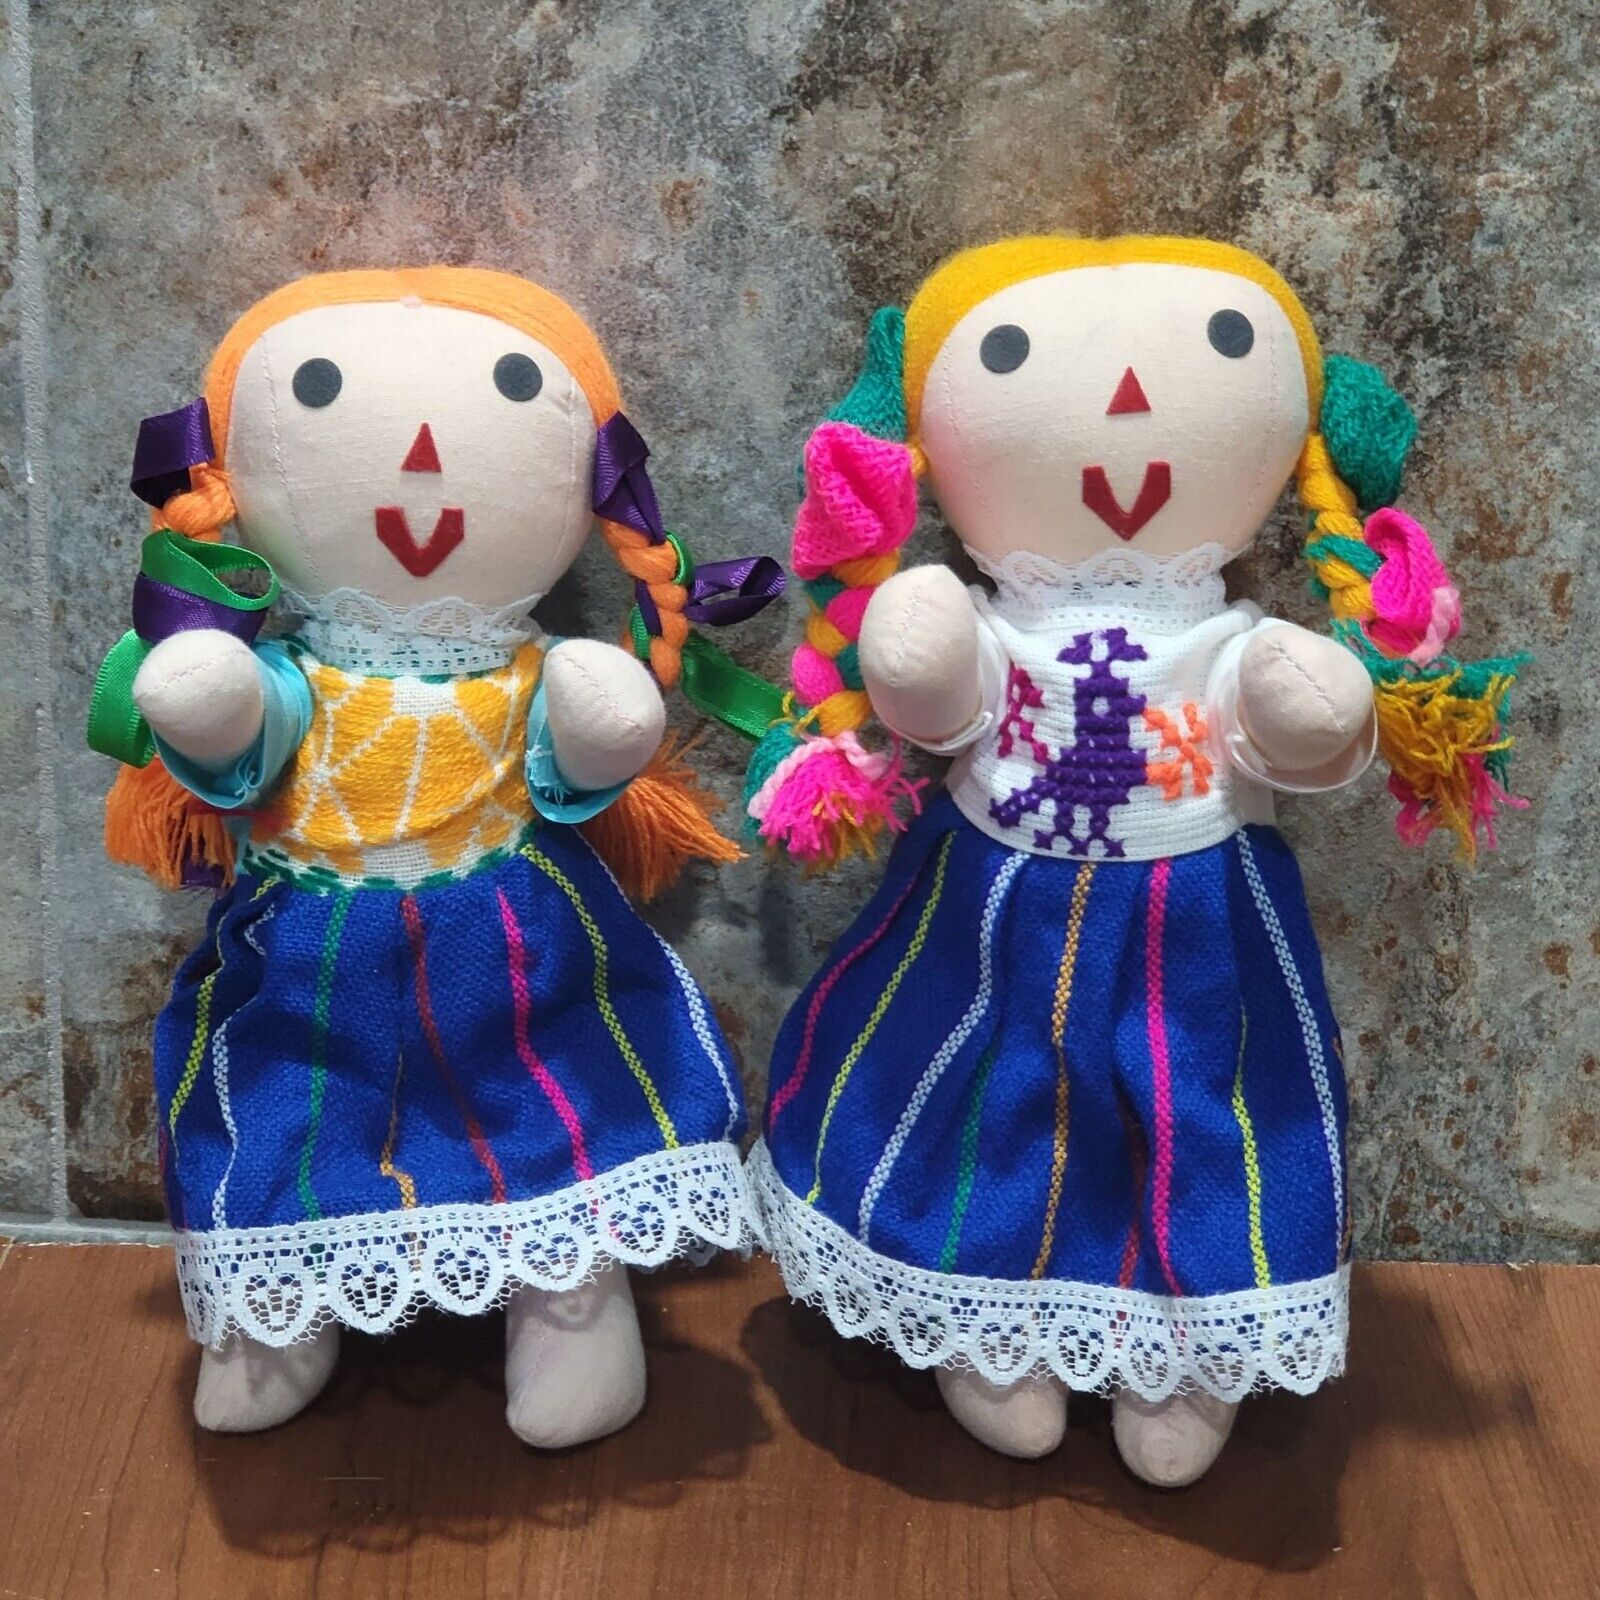 Vintage Handmade Mexican Folk Art Rag Doll Jointed Traditional Dress Colorful